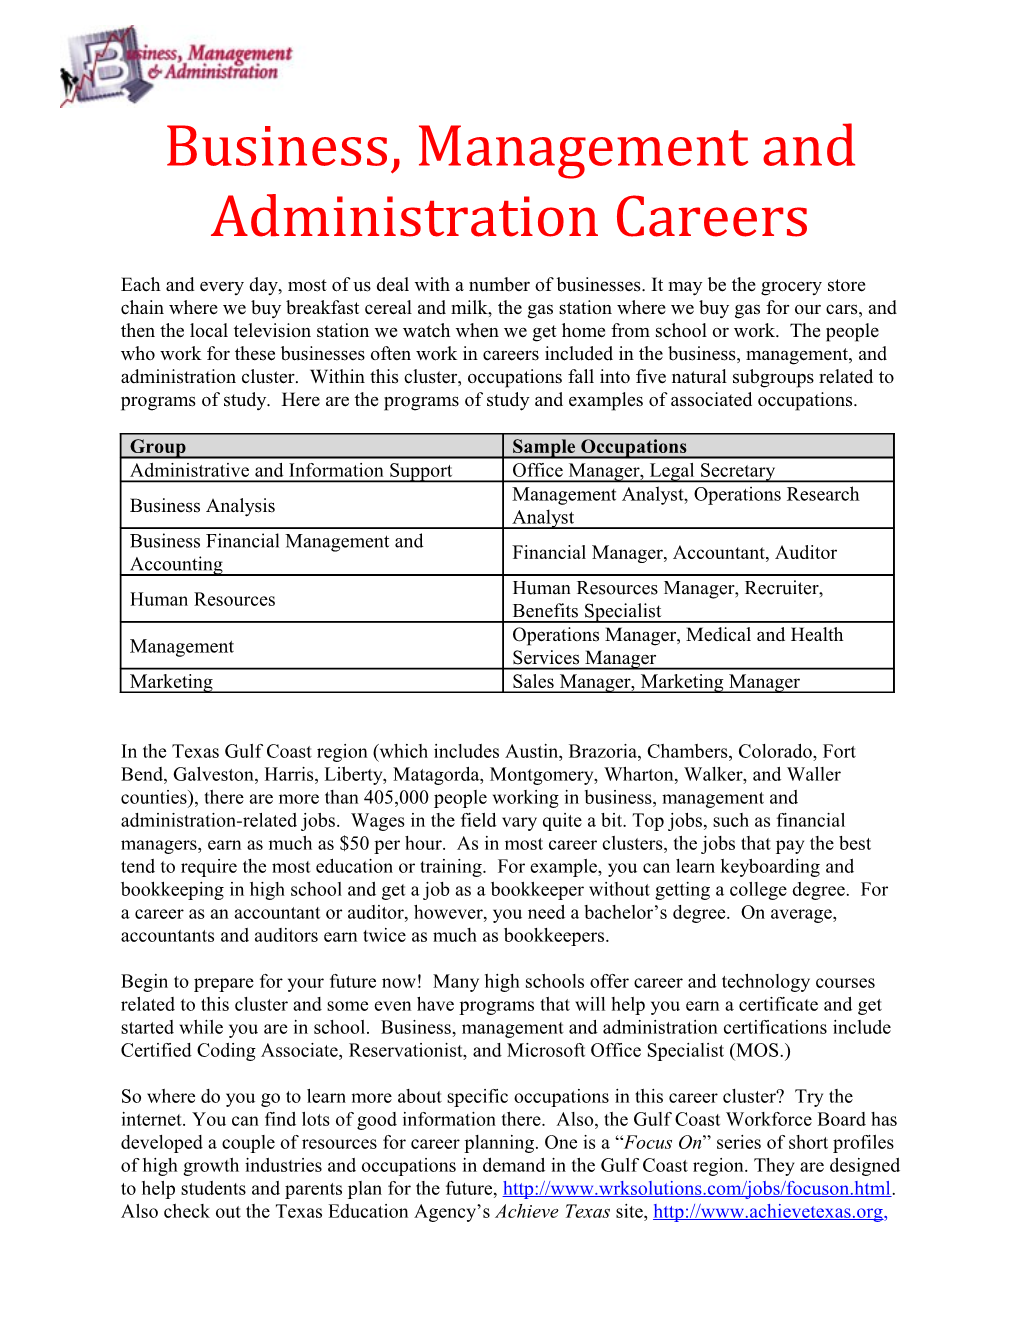 Business, Management and Administration Careers